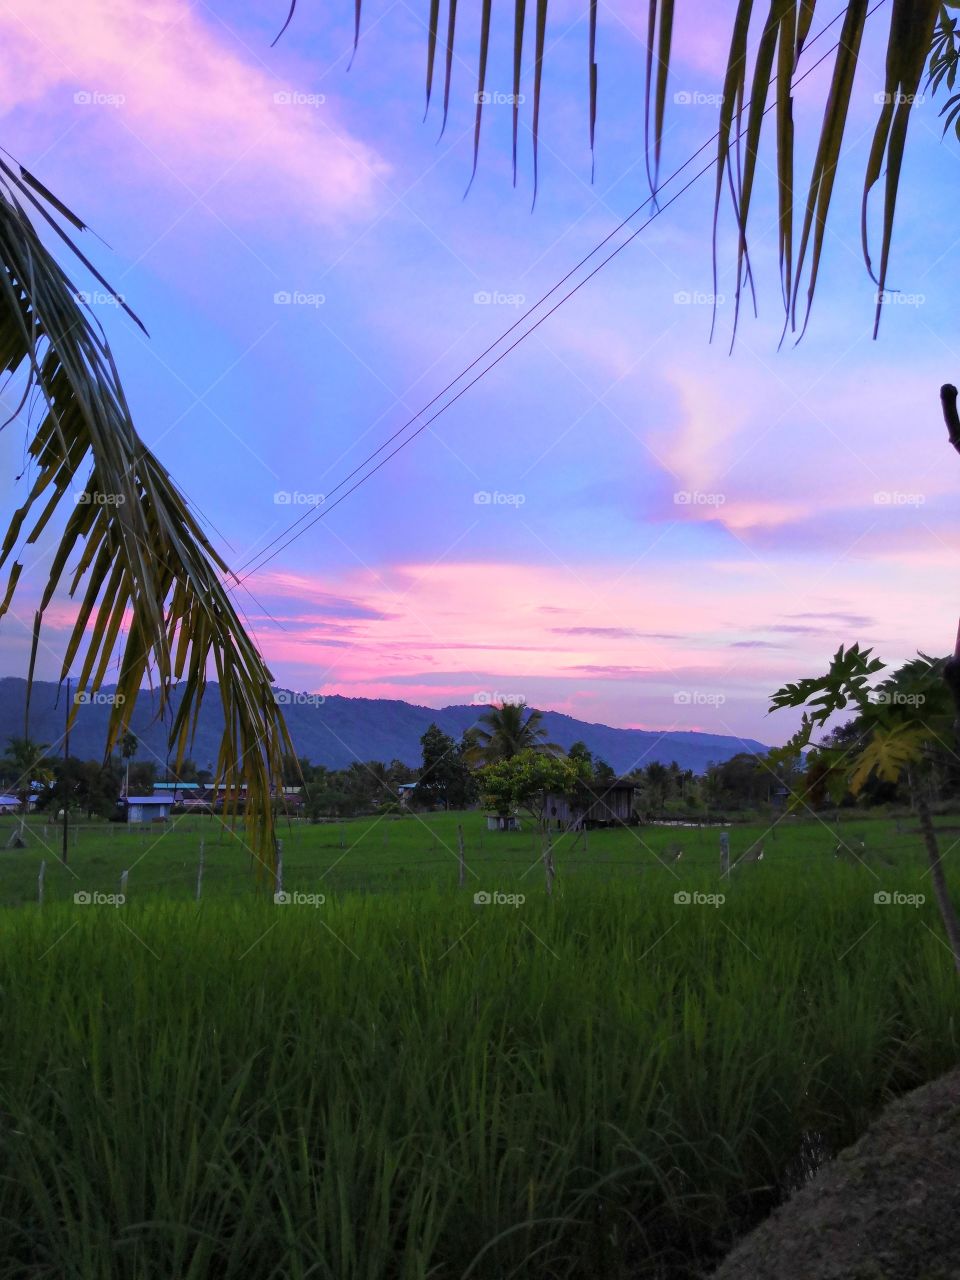 paddy field in borneo sabah. look how amazing is the sky. beautiful country.